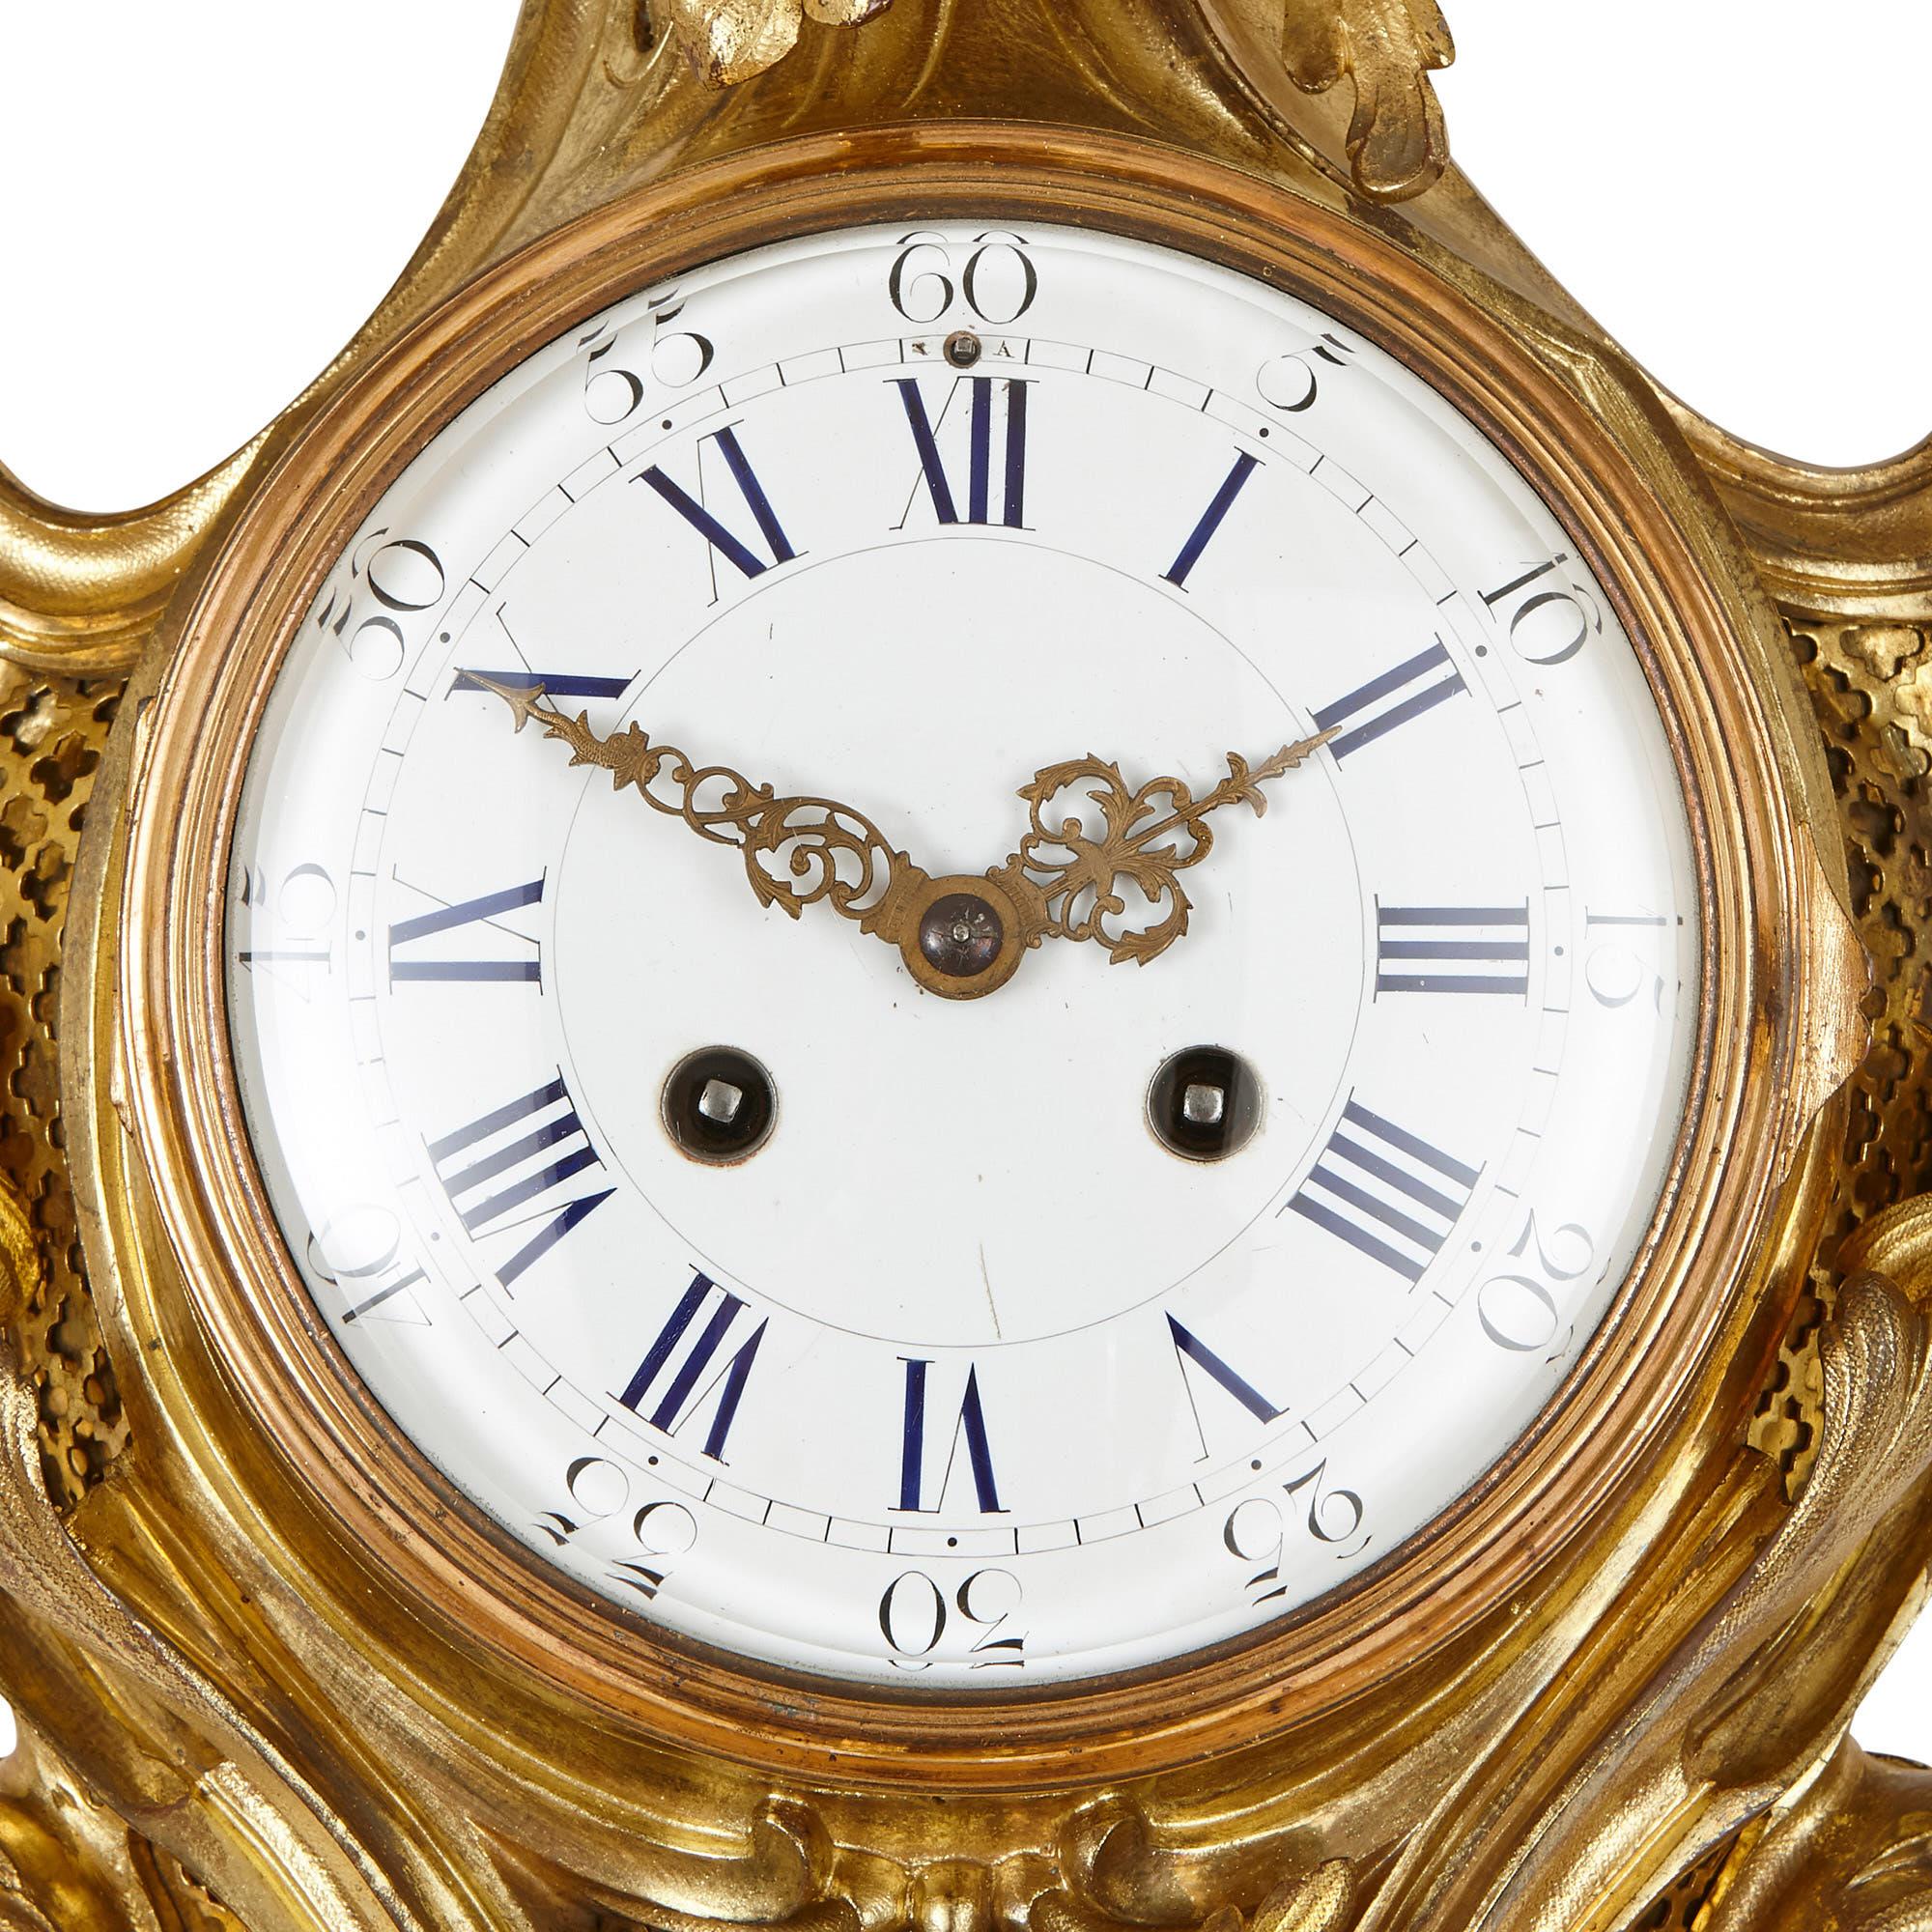 Designed in the French Rococo style, this clock and barometer set have been beautifully ornamented with scrolling foliate gilt bronze forms. The two are diamond shaped, with symmetrical bodies composed of a pointed top and bottom and two flicking